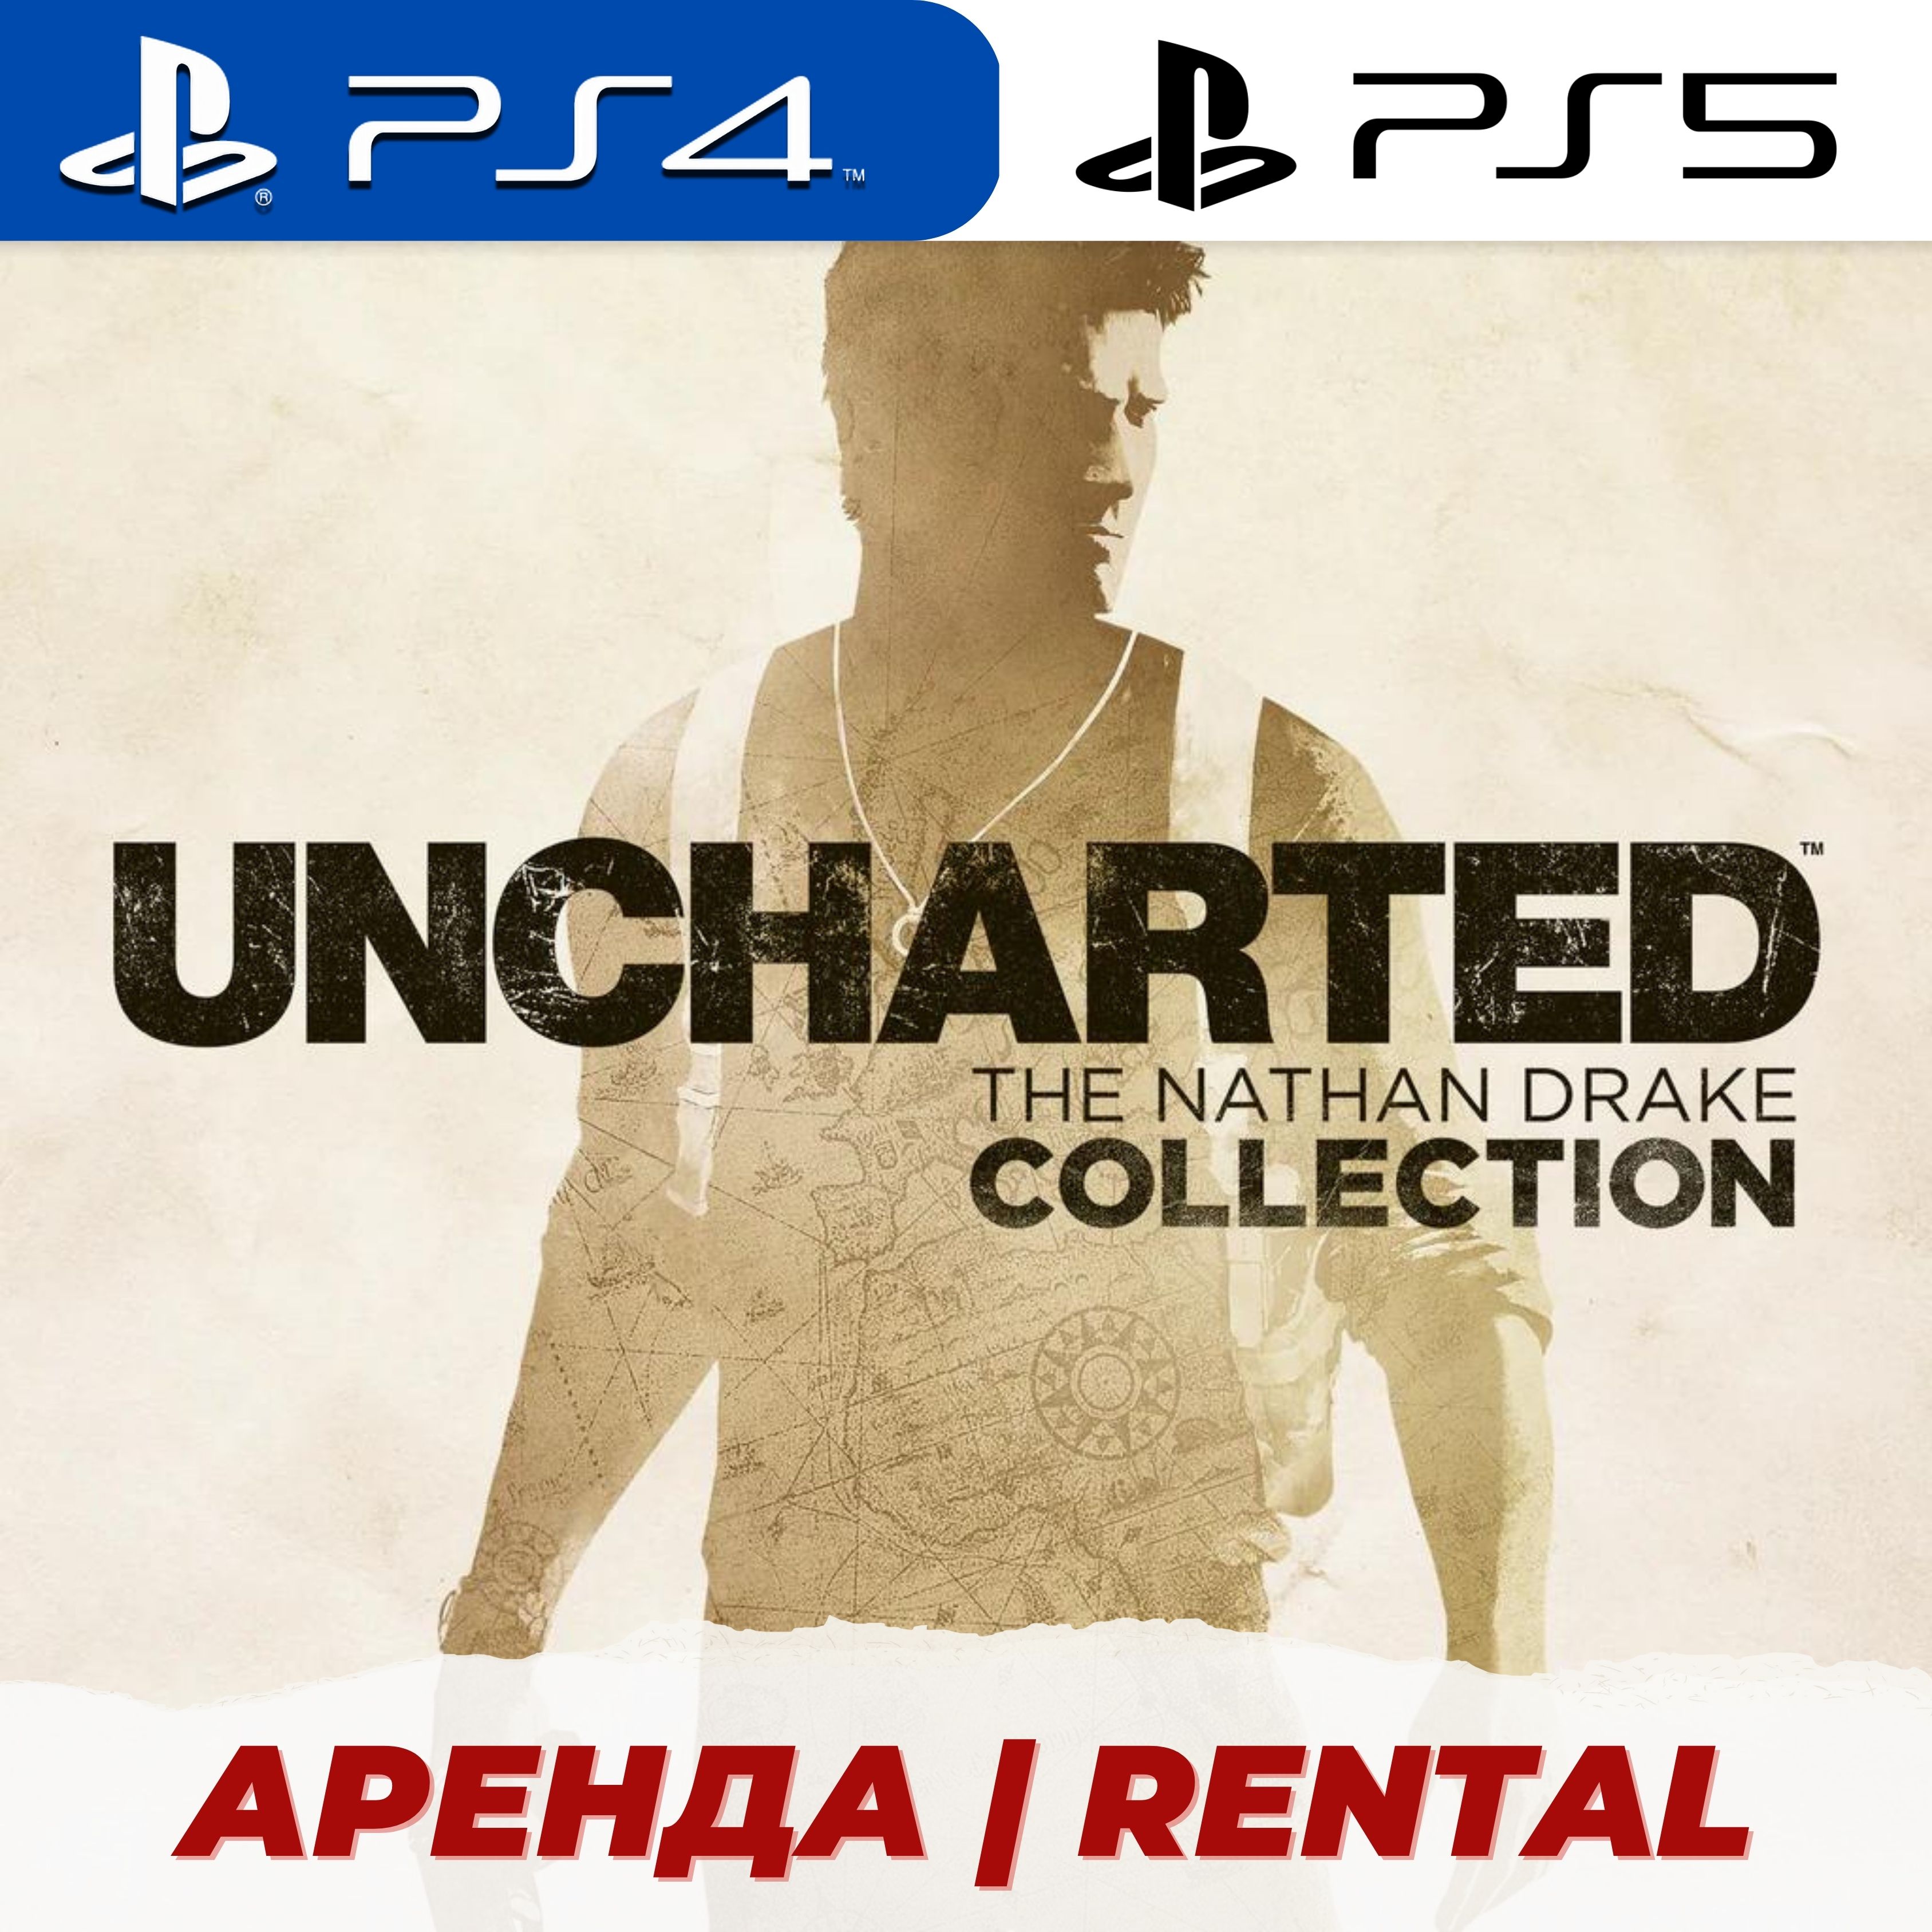 Игра uncharted collection. Uncharted collection ps4. Uncharted™: the Nathan Drake collection. Uncharted collection ps4 Cover. Uncharted коллекция ps4.